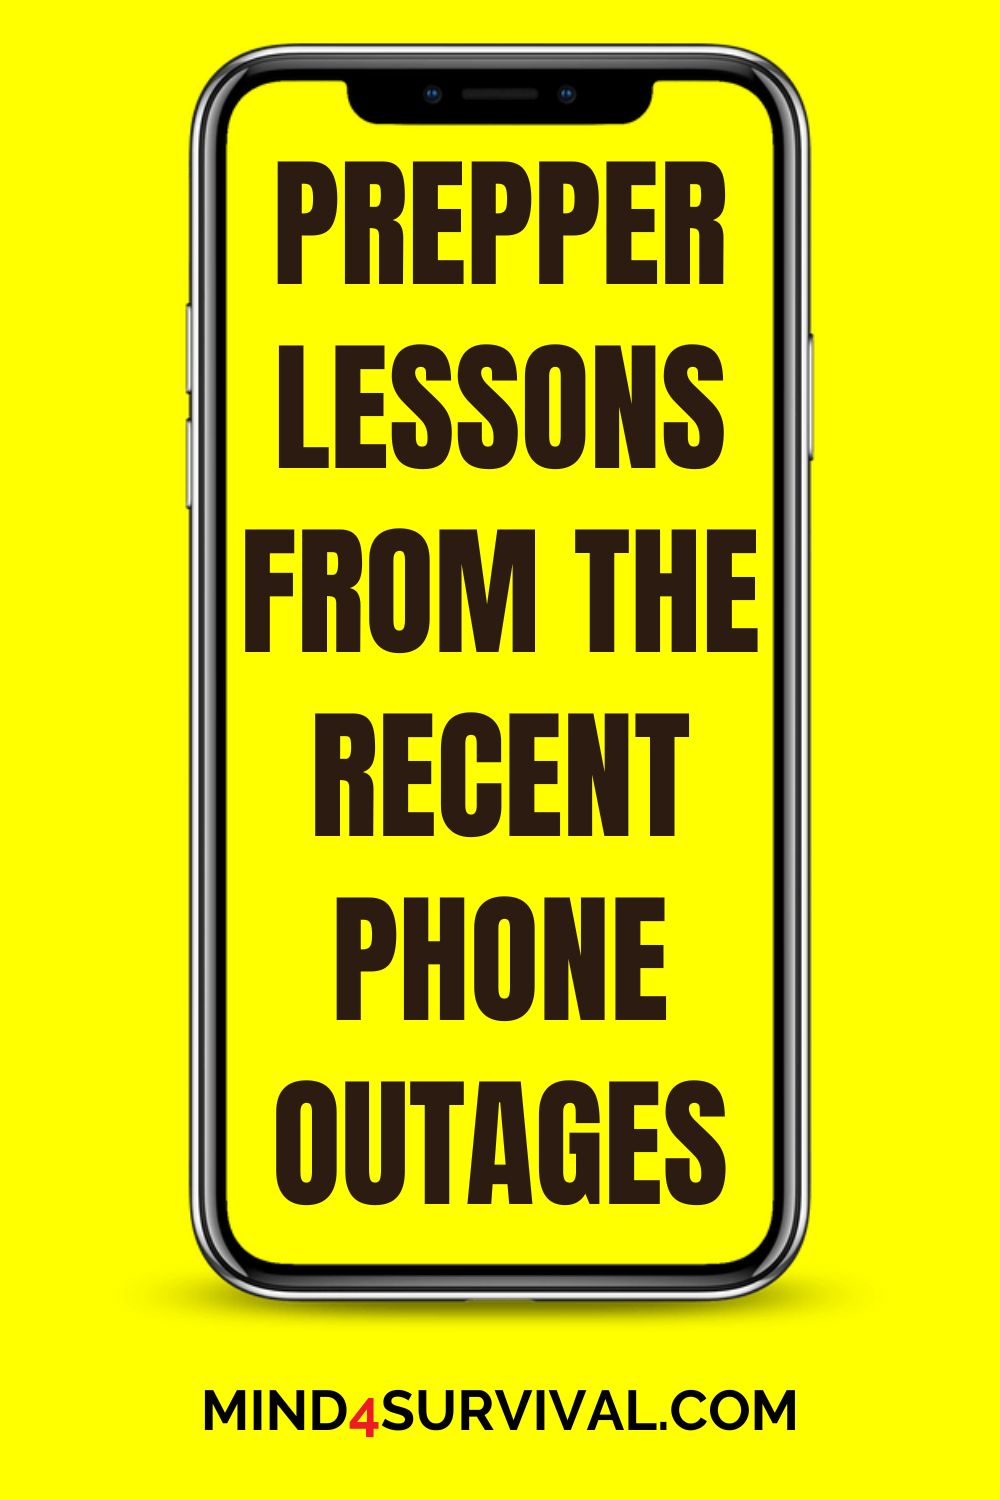 Prepper Lessons From the Recent Phone Outages